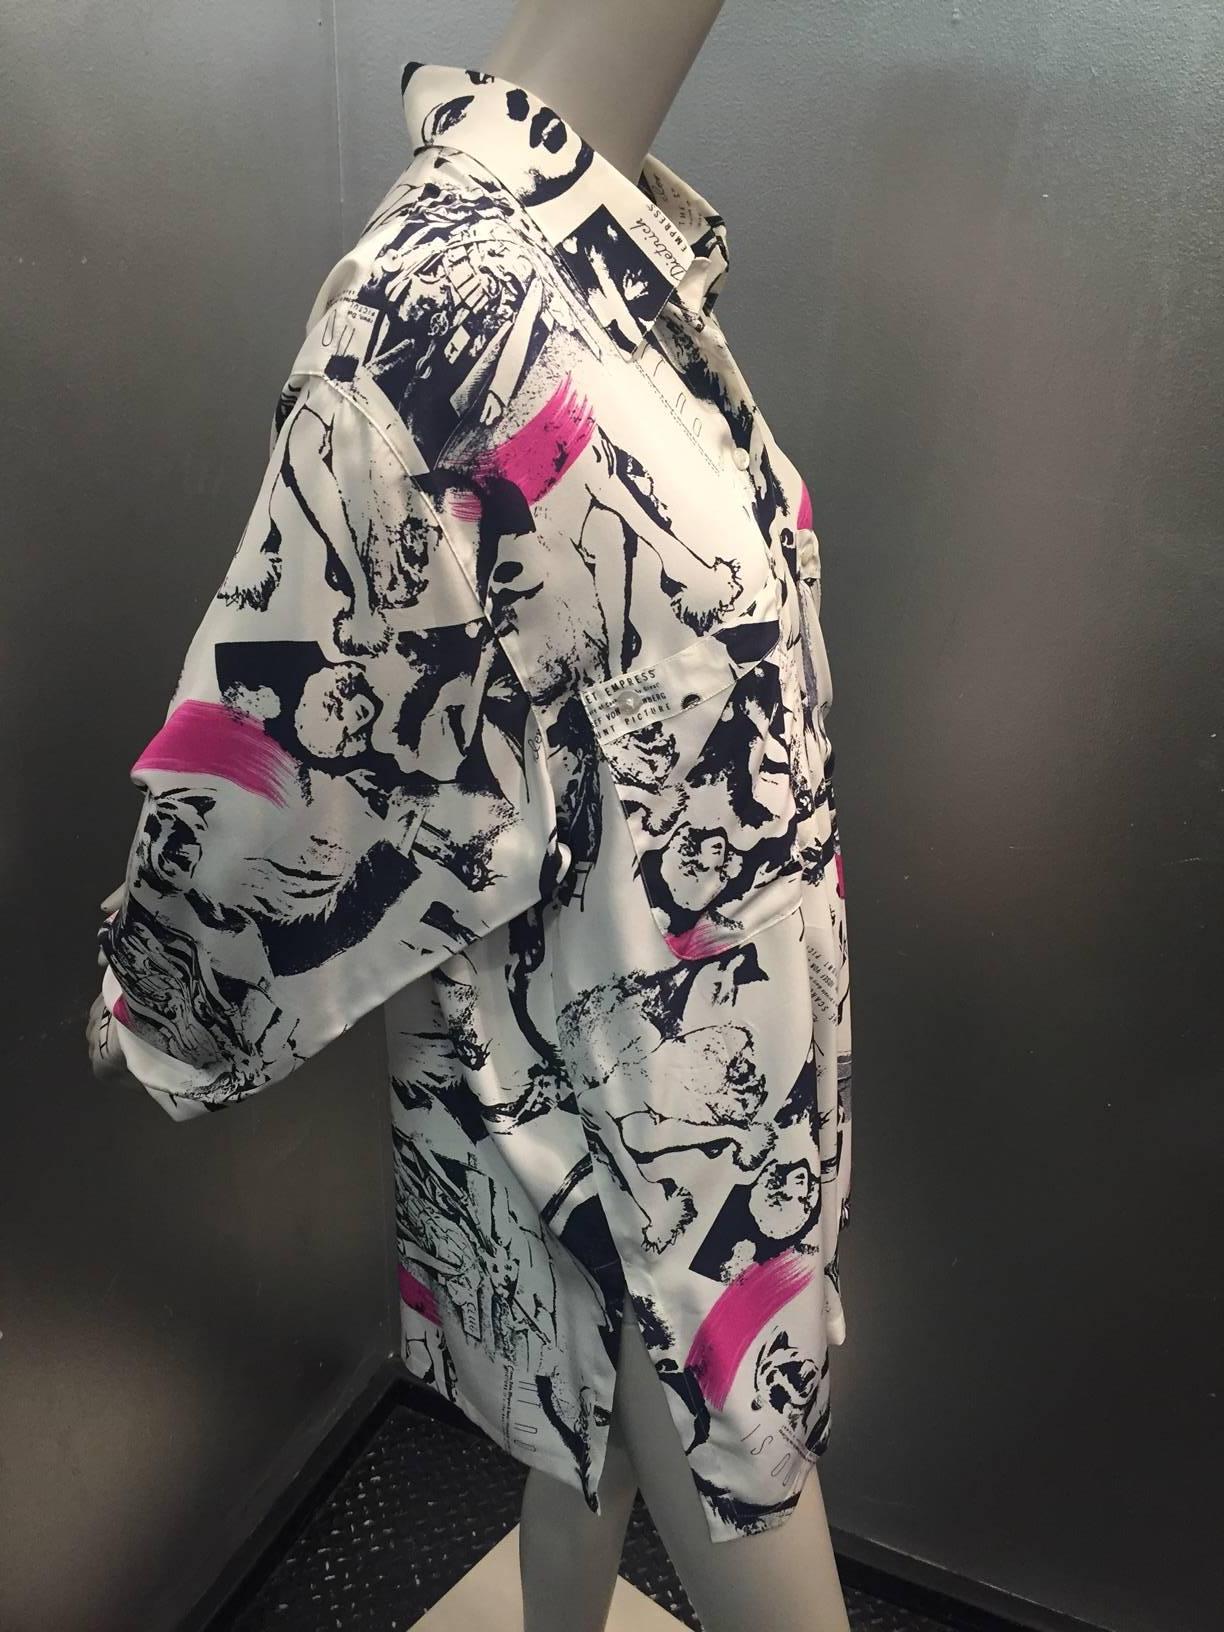 1990s Margaretha Ley for Escada iconic movie star print blouse in cream, navy and hot pink slashes.  Dolman sleeve, deep center pleat in back for a swing effect. Large front pockets. Dietrich!  Garbo!  Mae West! Chaplin! 